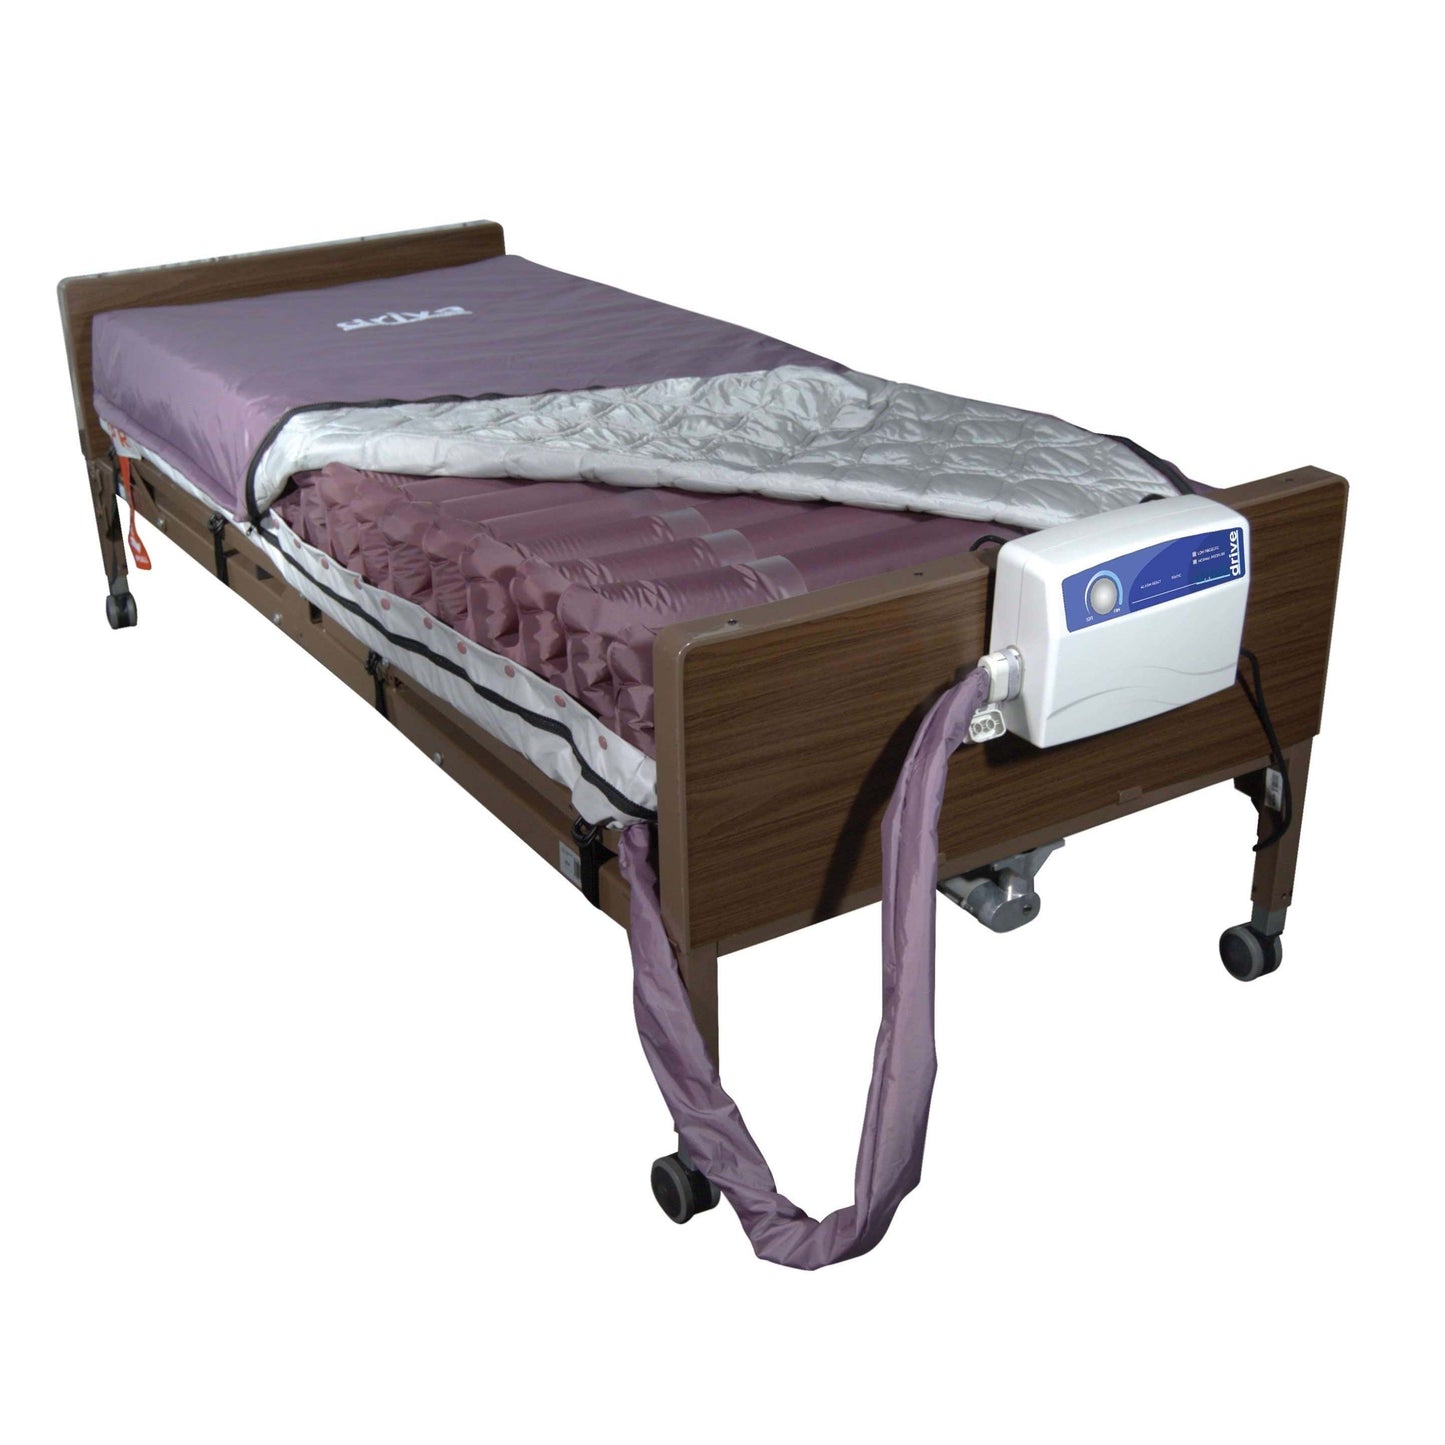 Drive 14027 Med Aire Low Air Loss Mattress Replacement System with Alternating Pressure